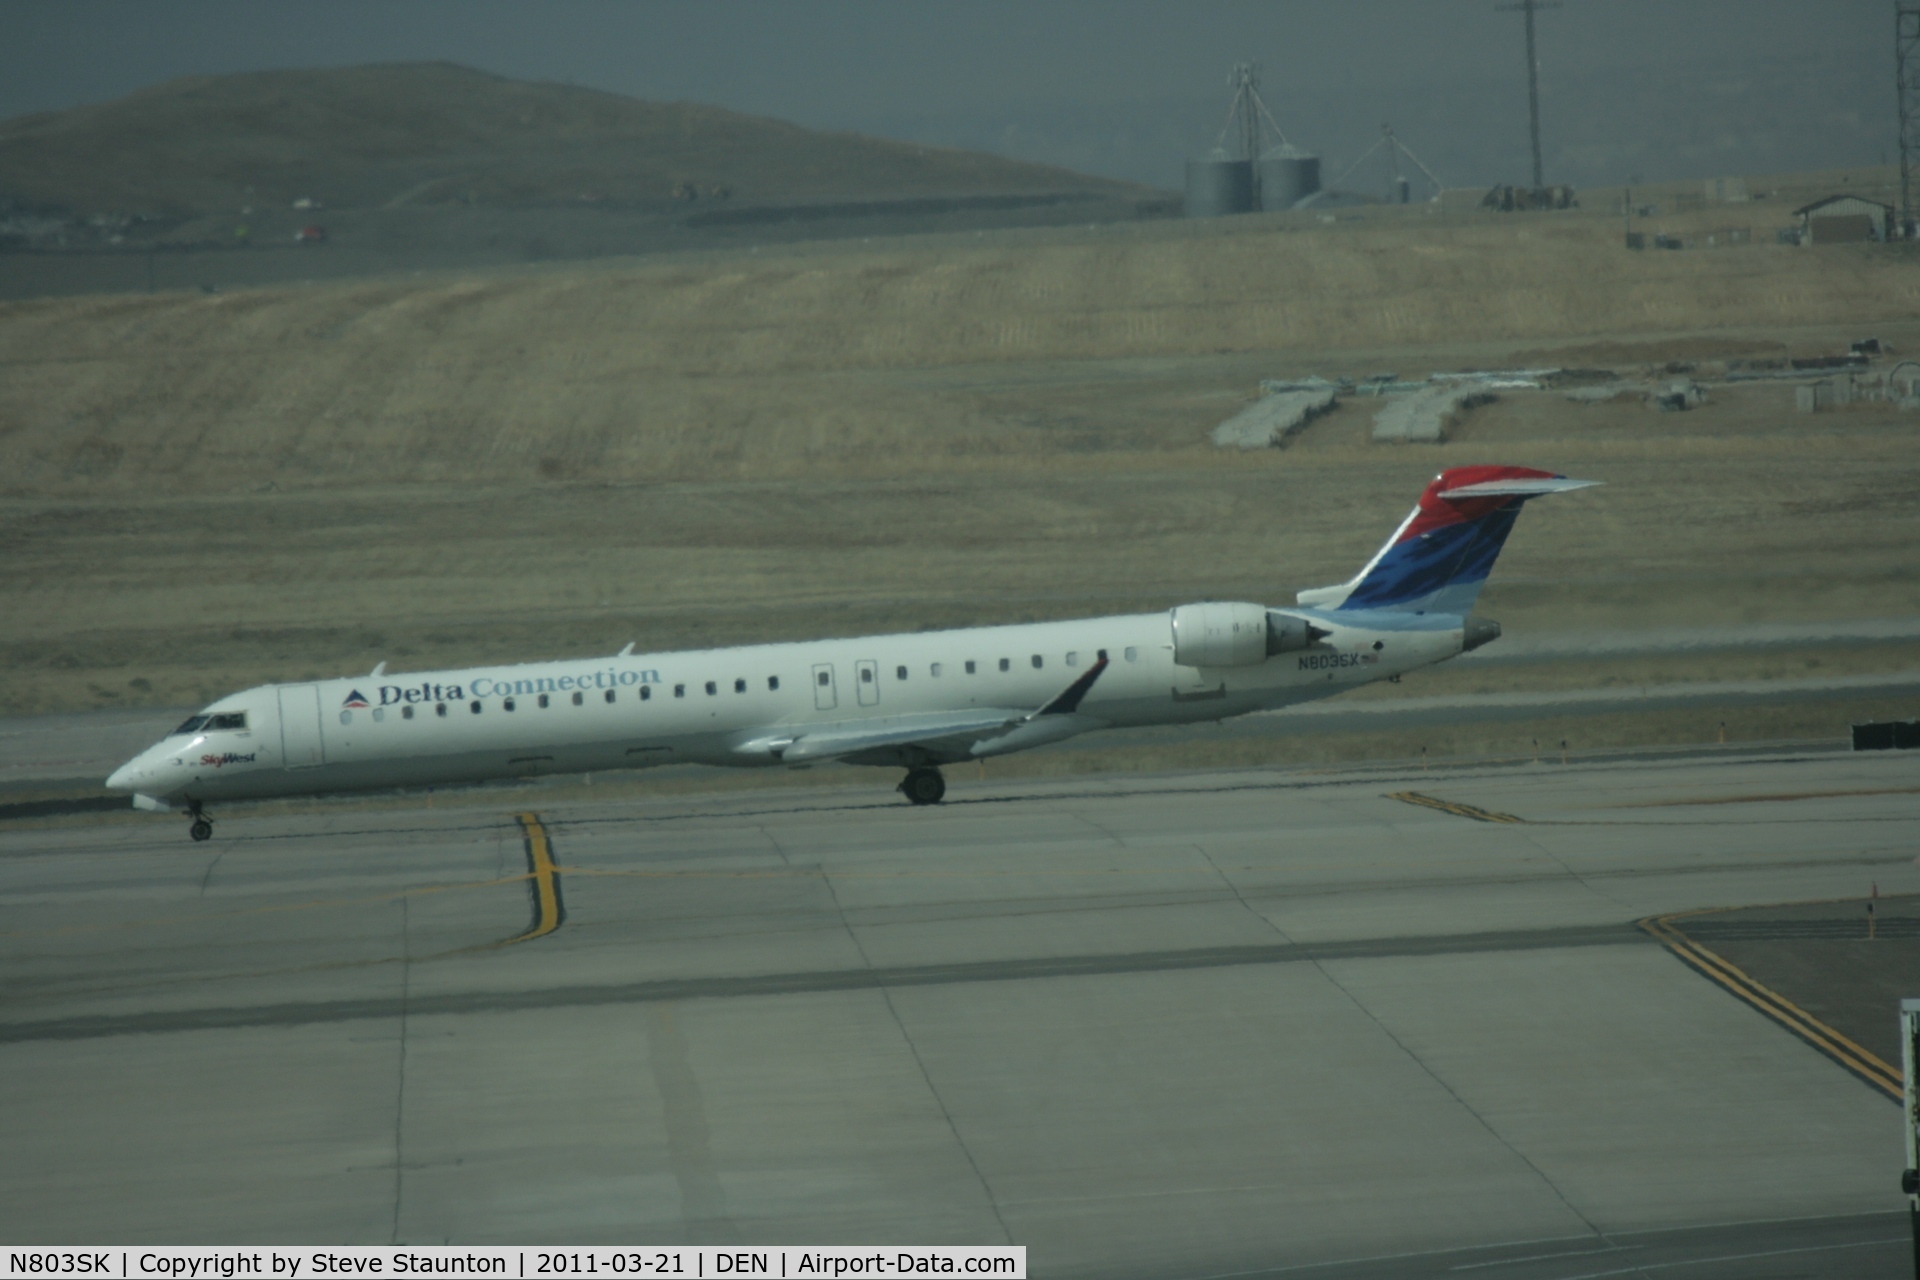 N803SK, 2006 Bombardier CRJ-900ER (CL-600-2D24) C/N 15062, Taken at Denver International Airport, in March 2011 whilst on an Aeroprint Aviation tour